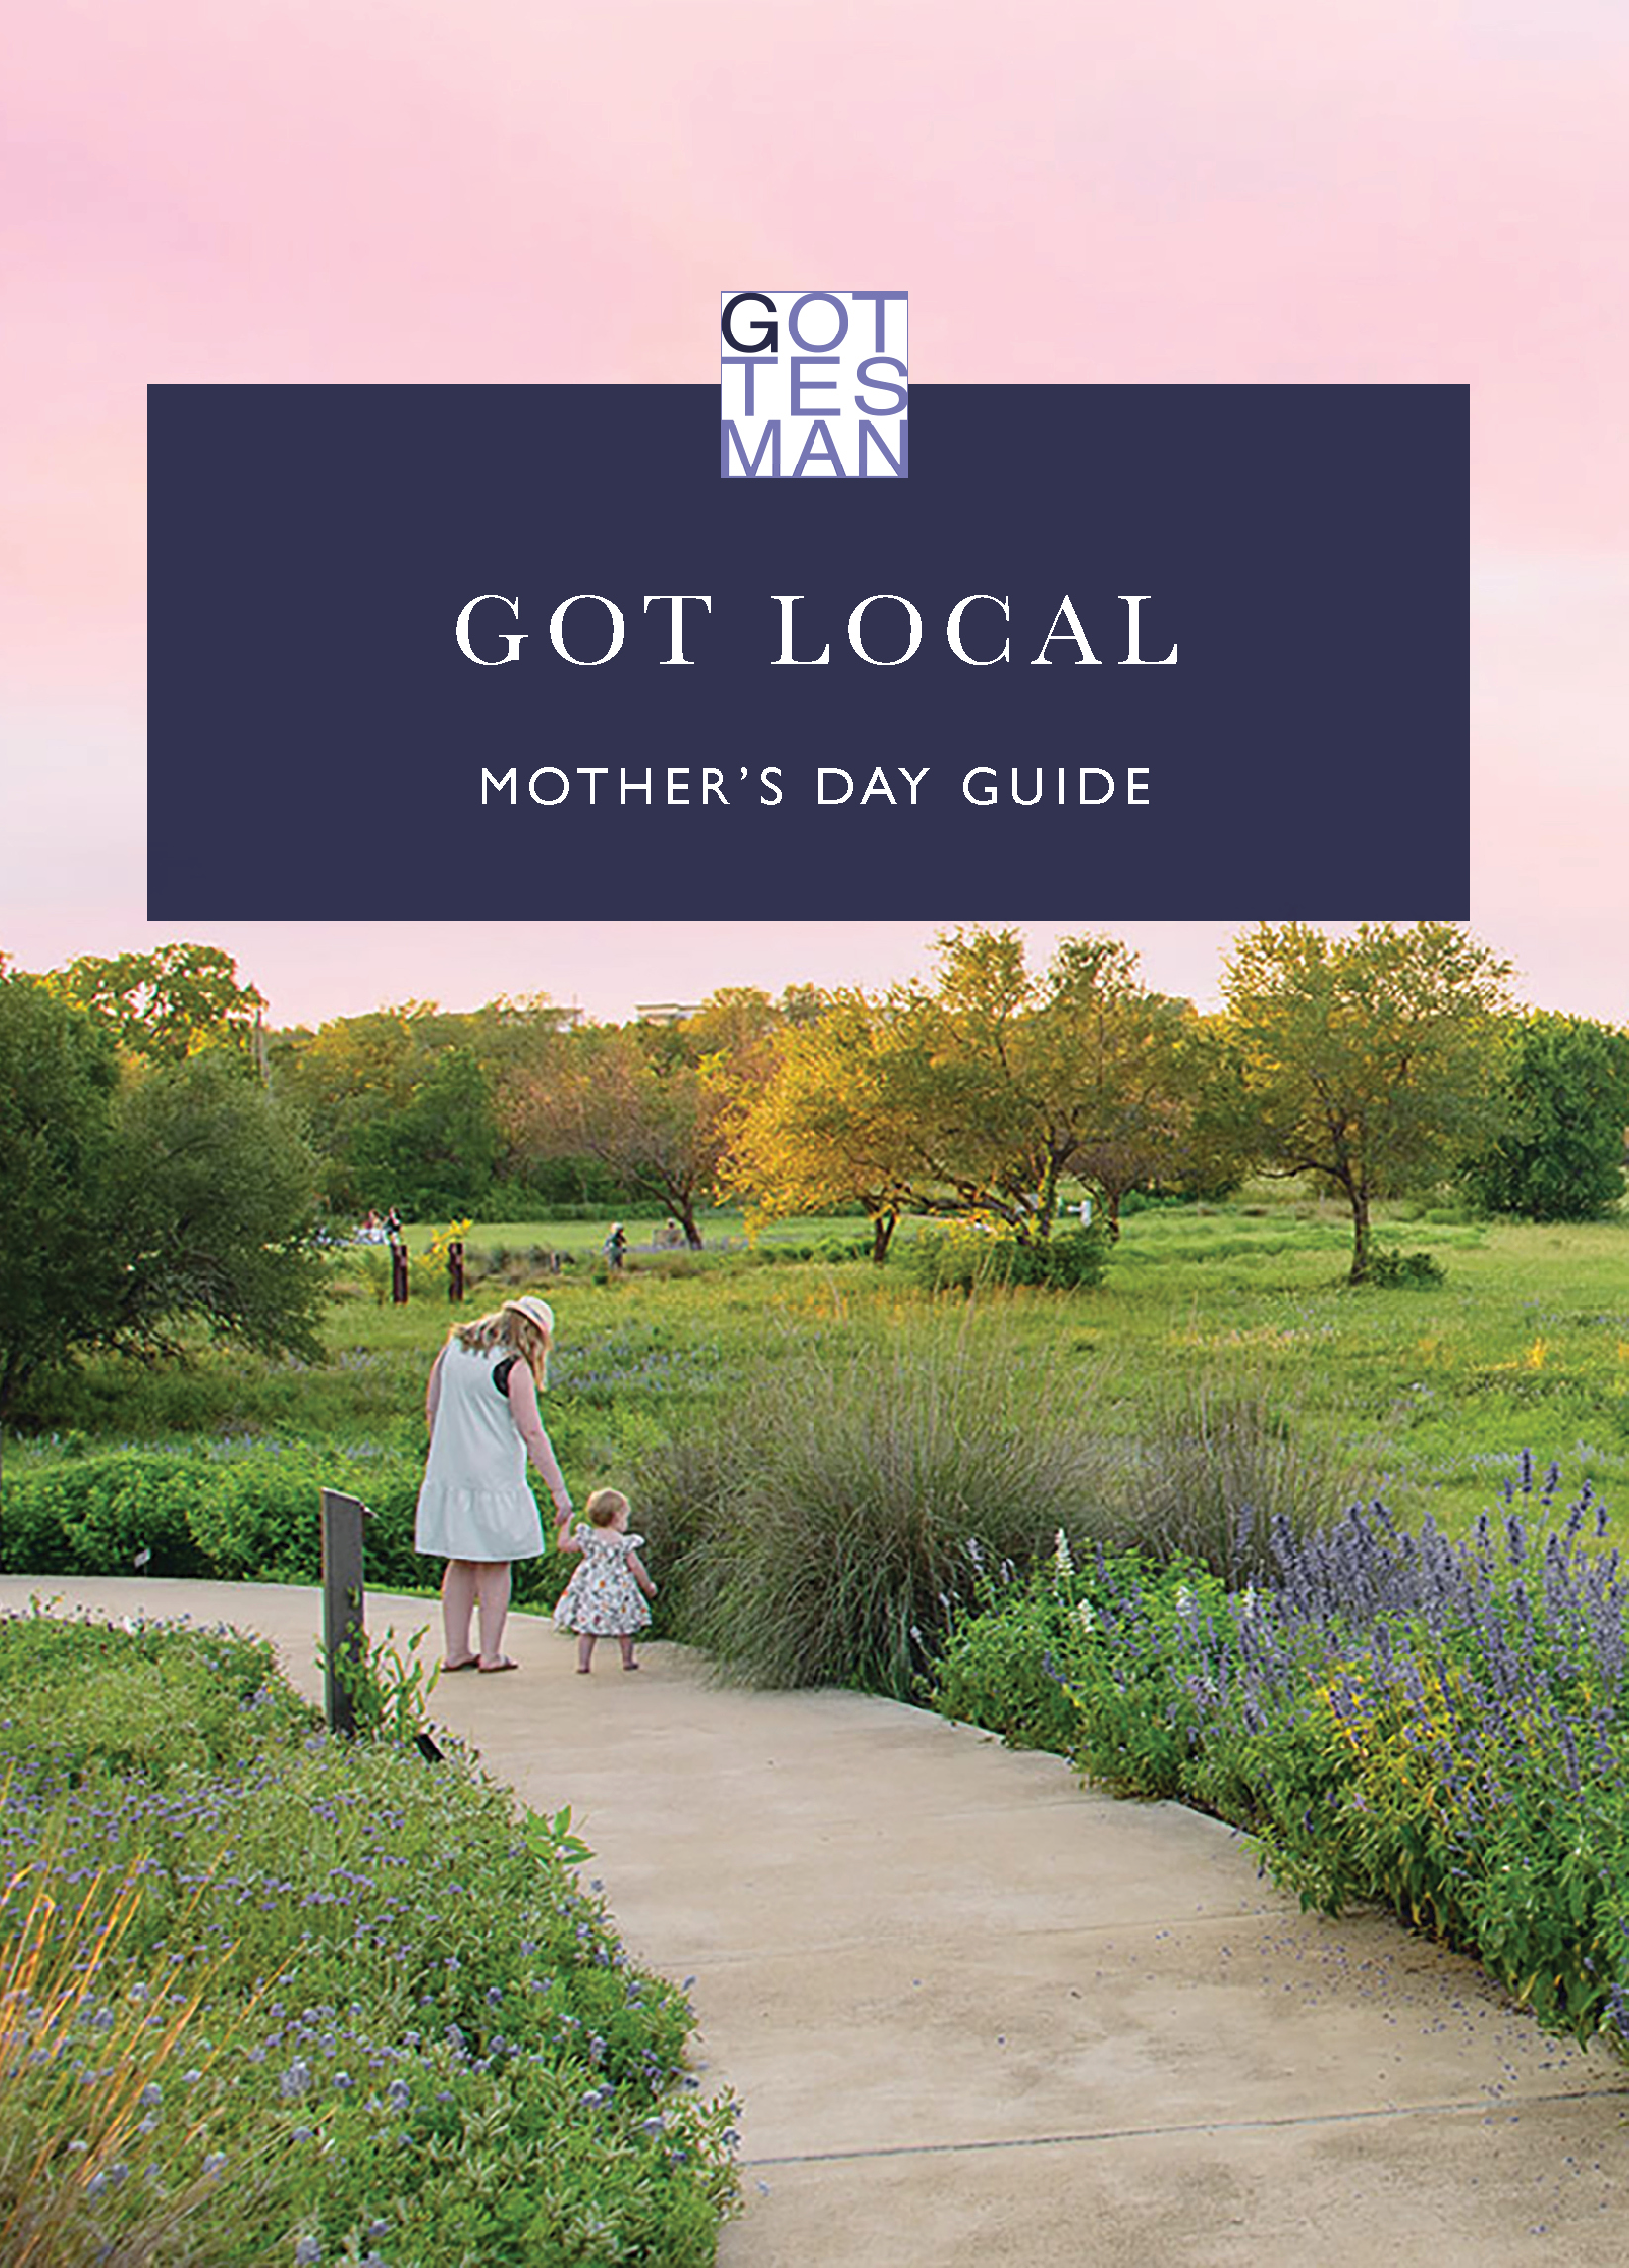 "Got Local: Mother's Day Guide"